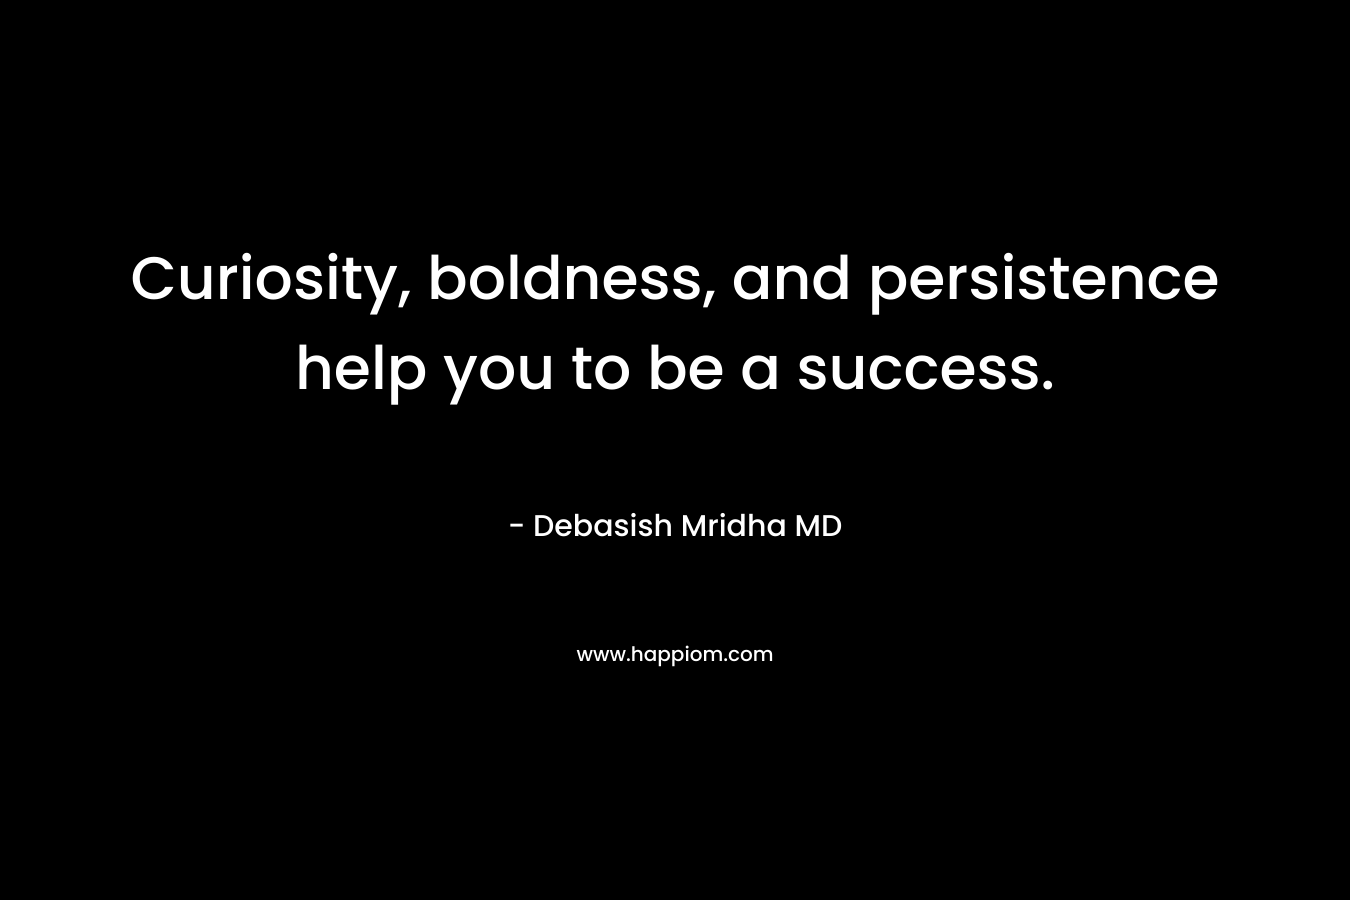 Curiosity, boldness, and persistence help you to be a success. – Debasish Mridha MD